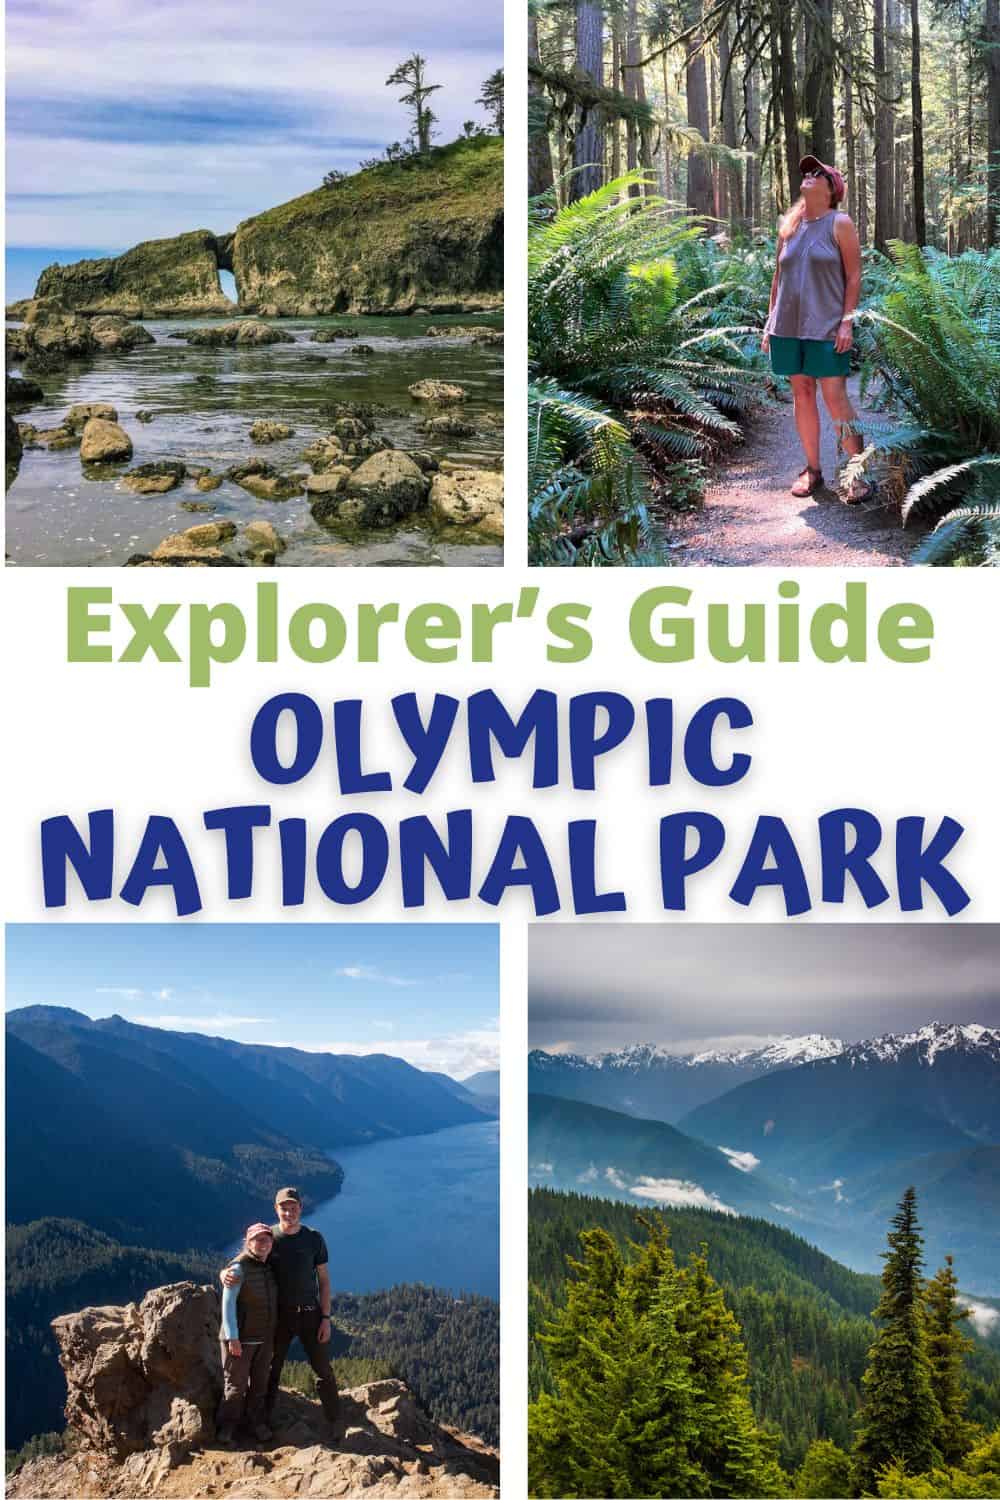 Beaches, mountains, and waterfalls in Olympic National Park.